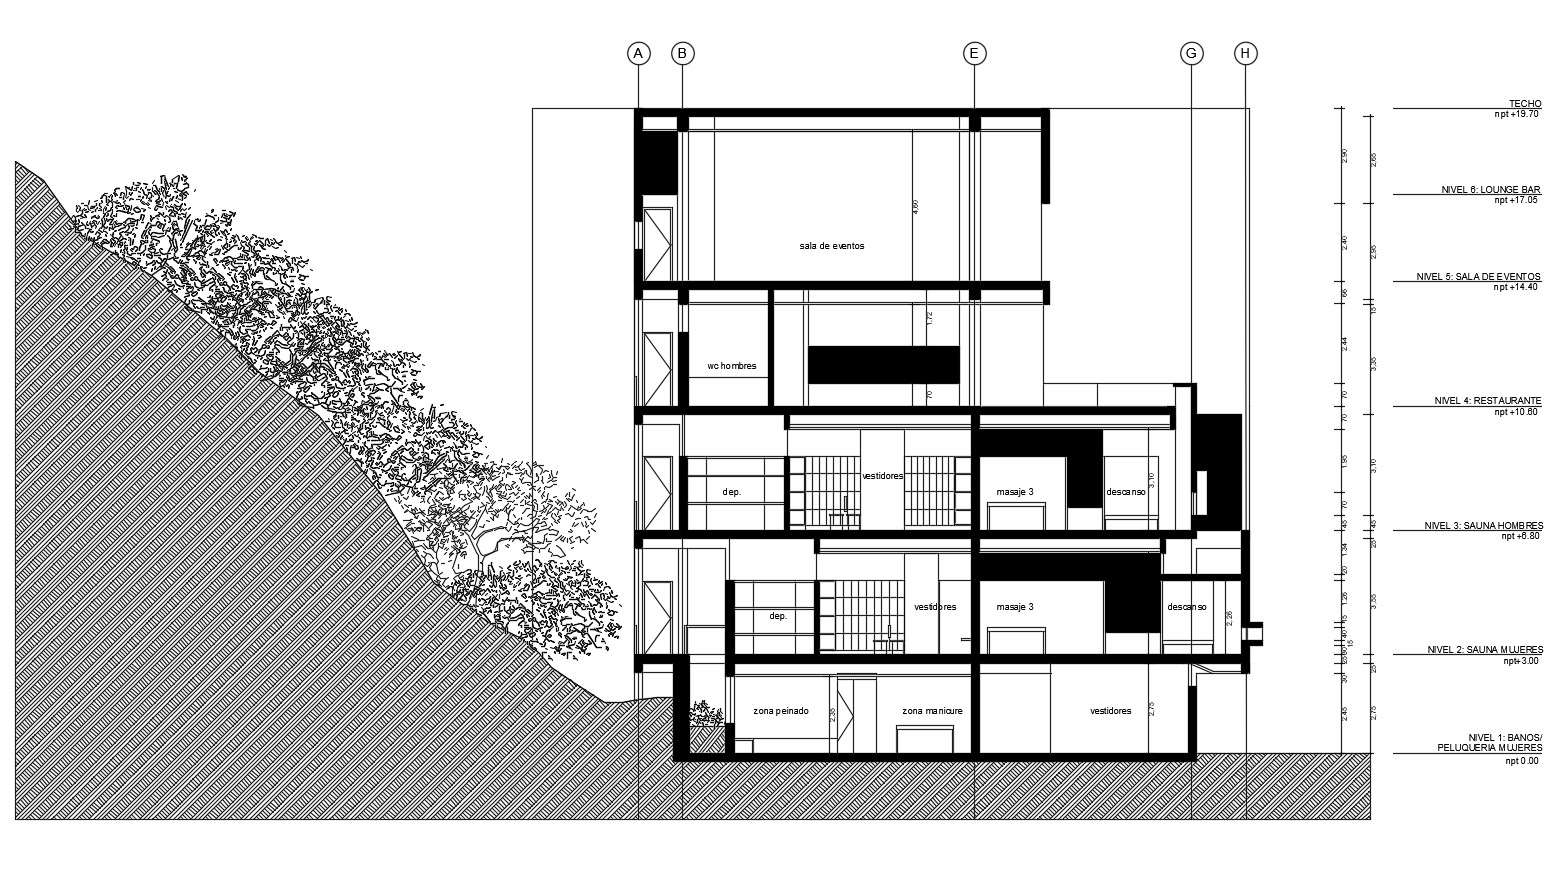 Sectional elevation of a commercial building in dwg file 